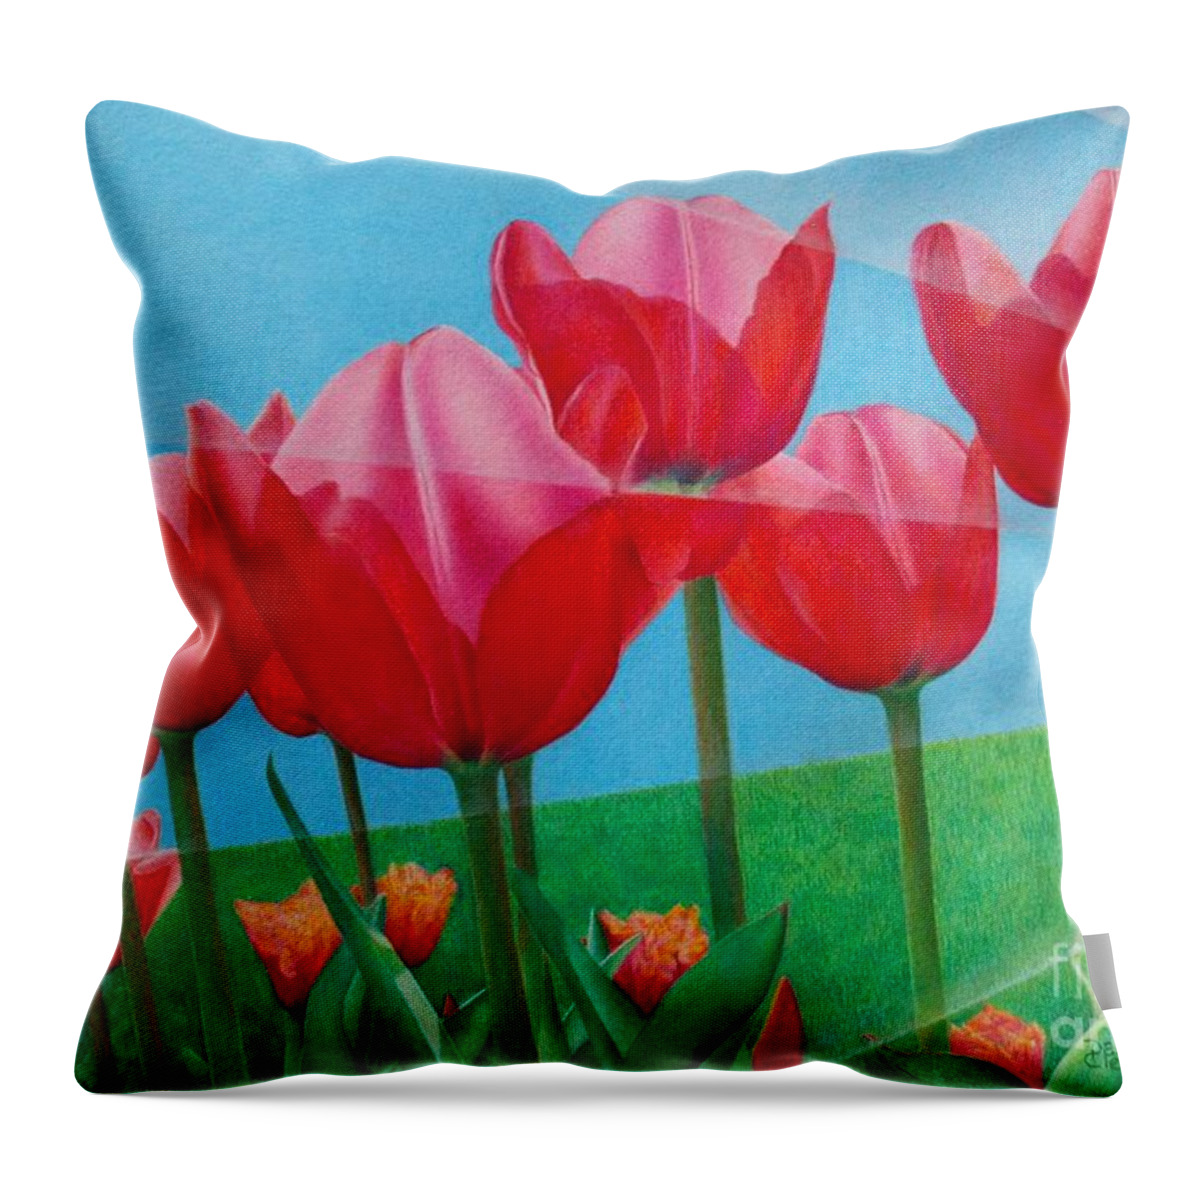 Tulips Throw Pillow featuring the painting Blue Ray Tulips by Pamela Clements